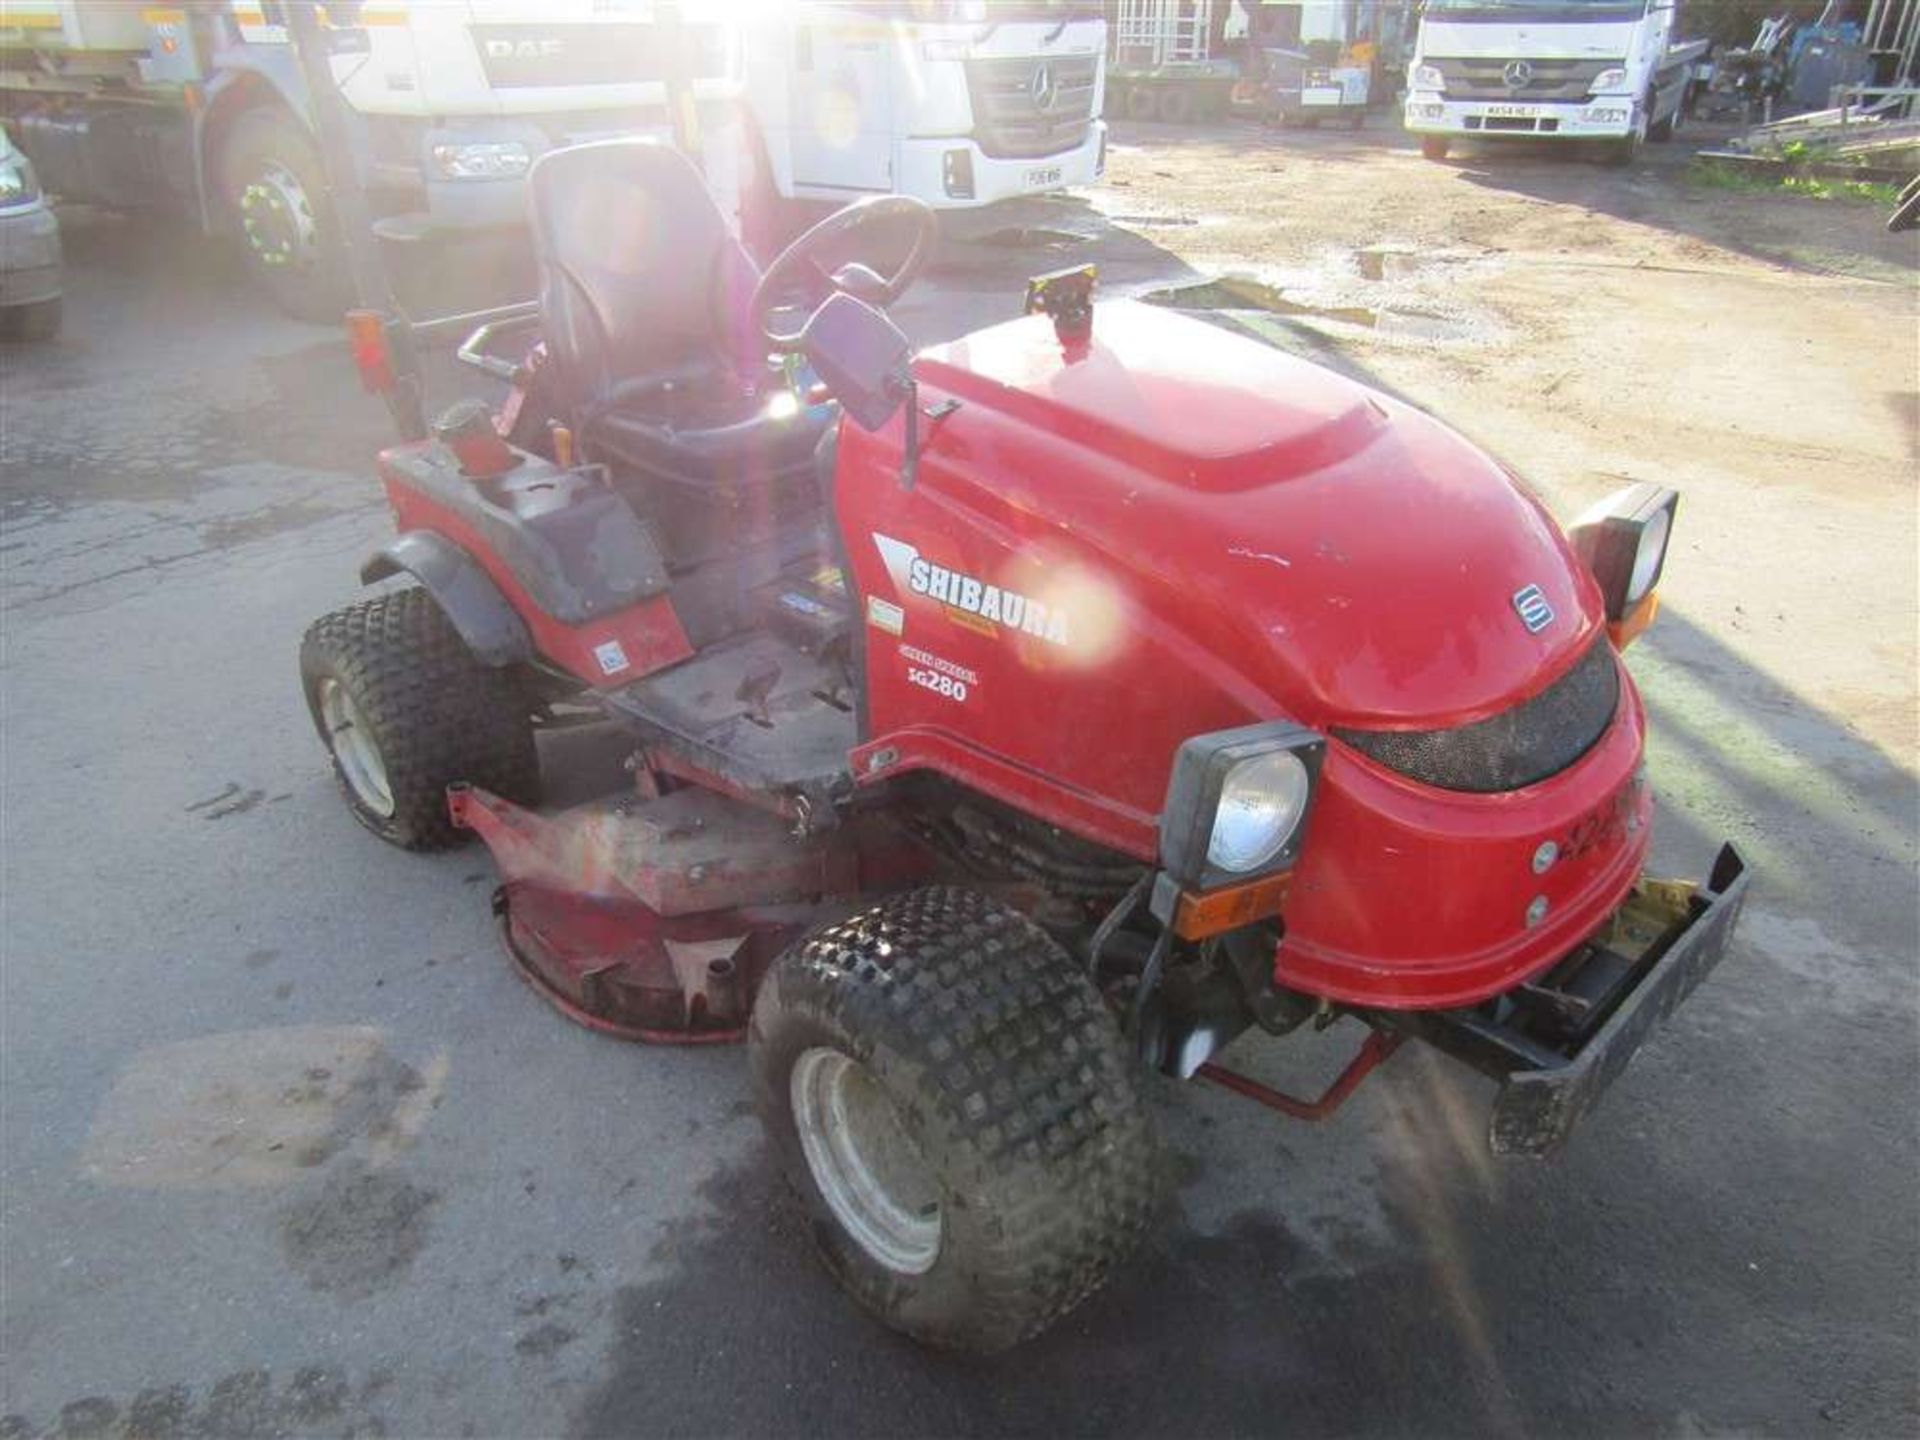 Shibaura Green Special SG280 Ride On Mower (Direct Council